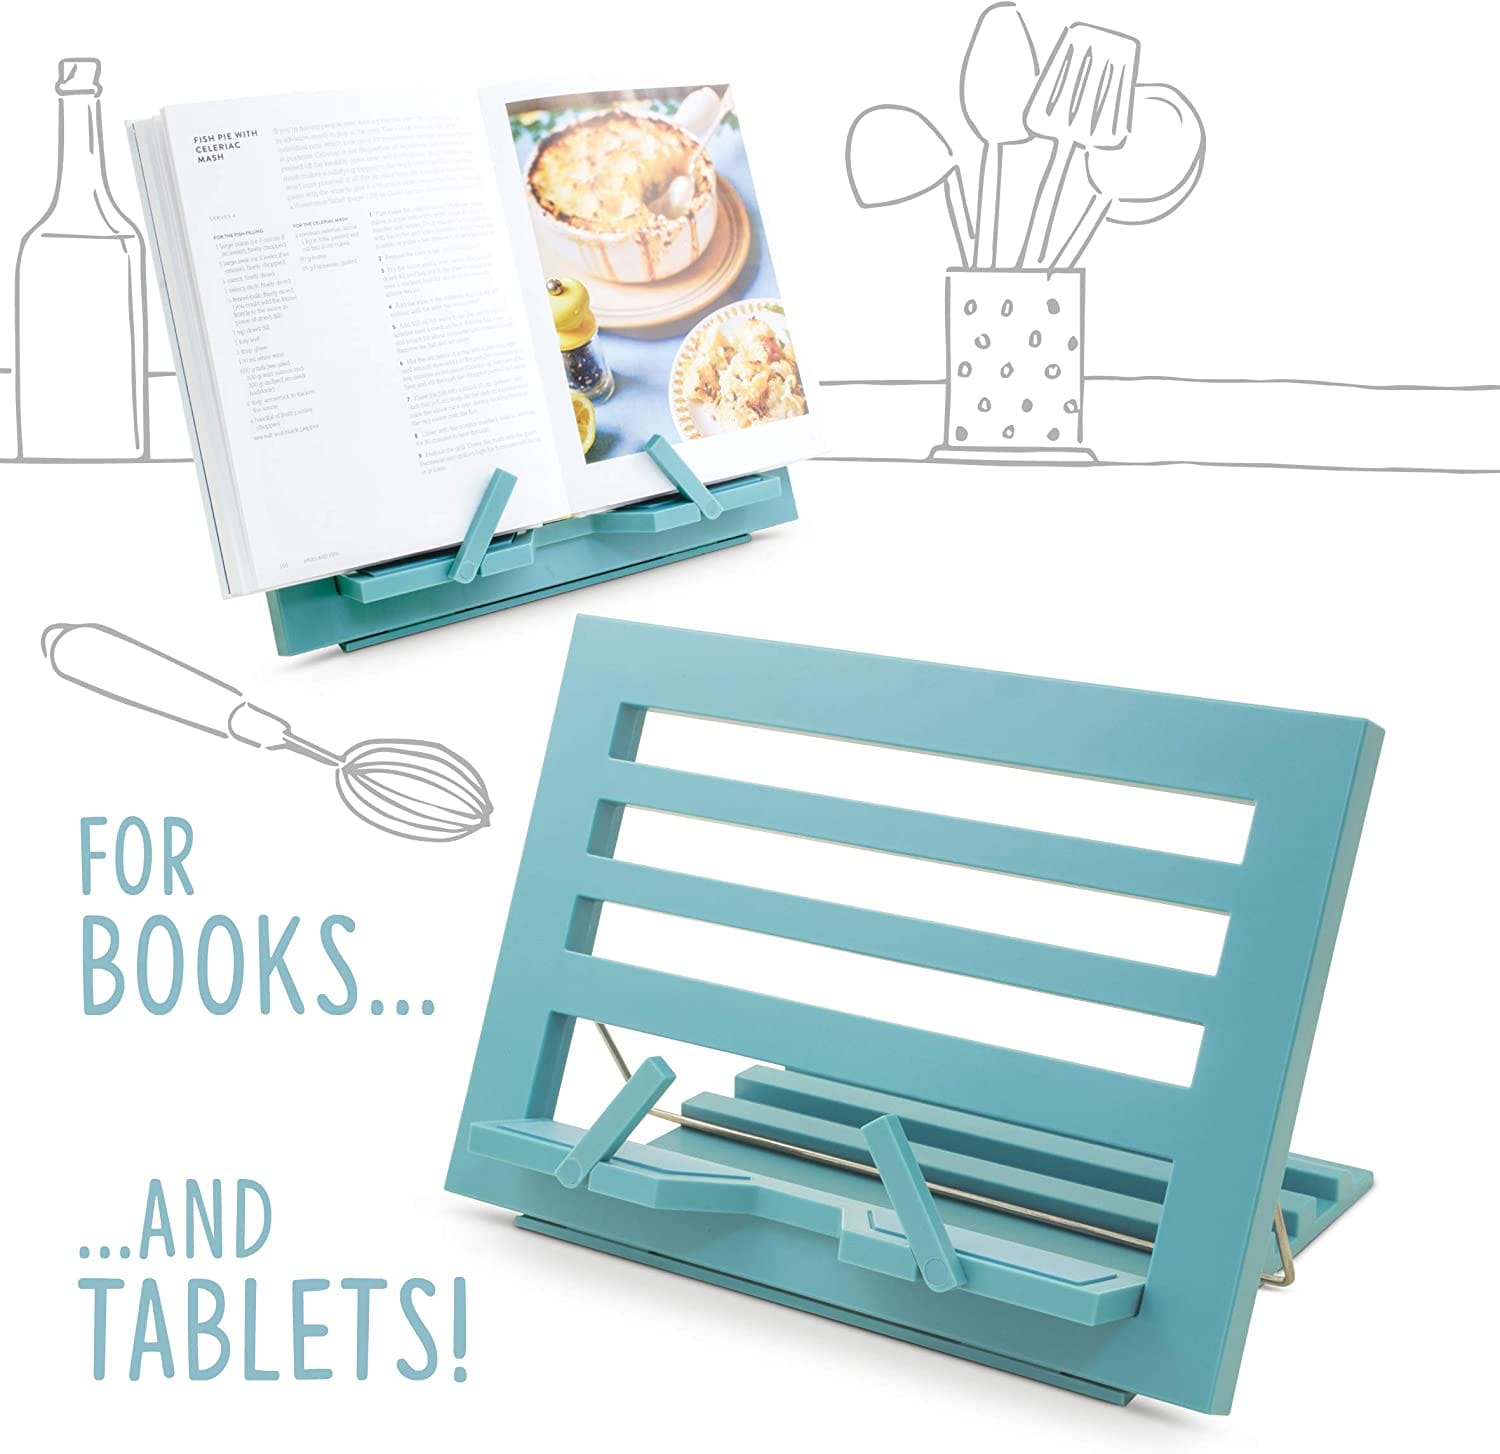 THE NEW BRILLIANT READING REST - SOFT BLUE